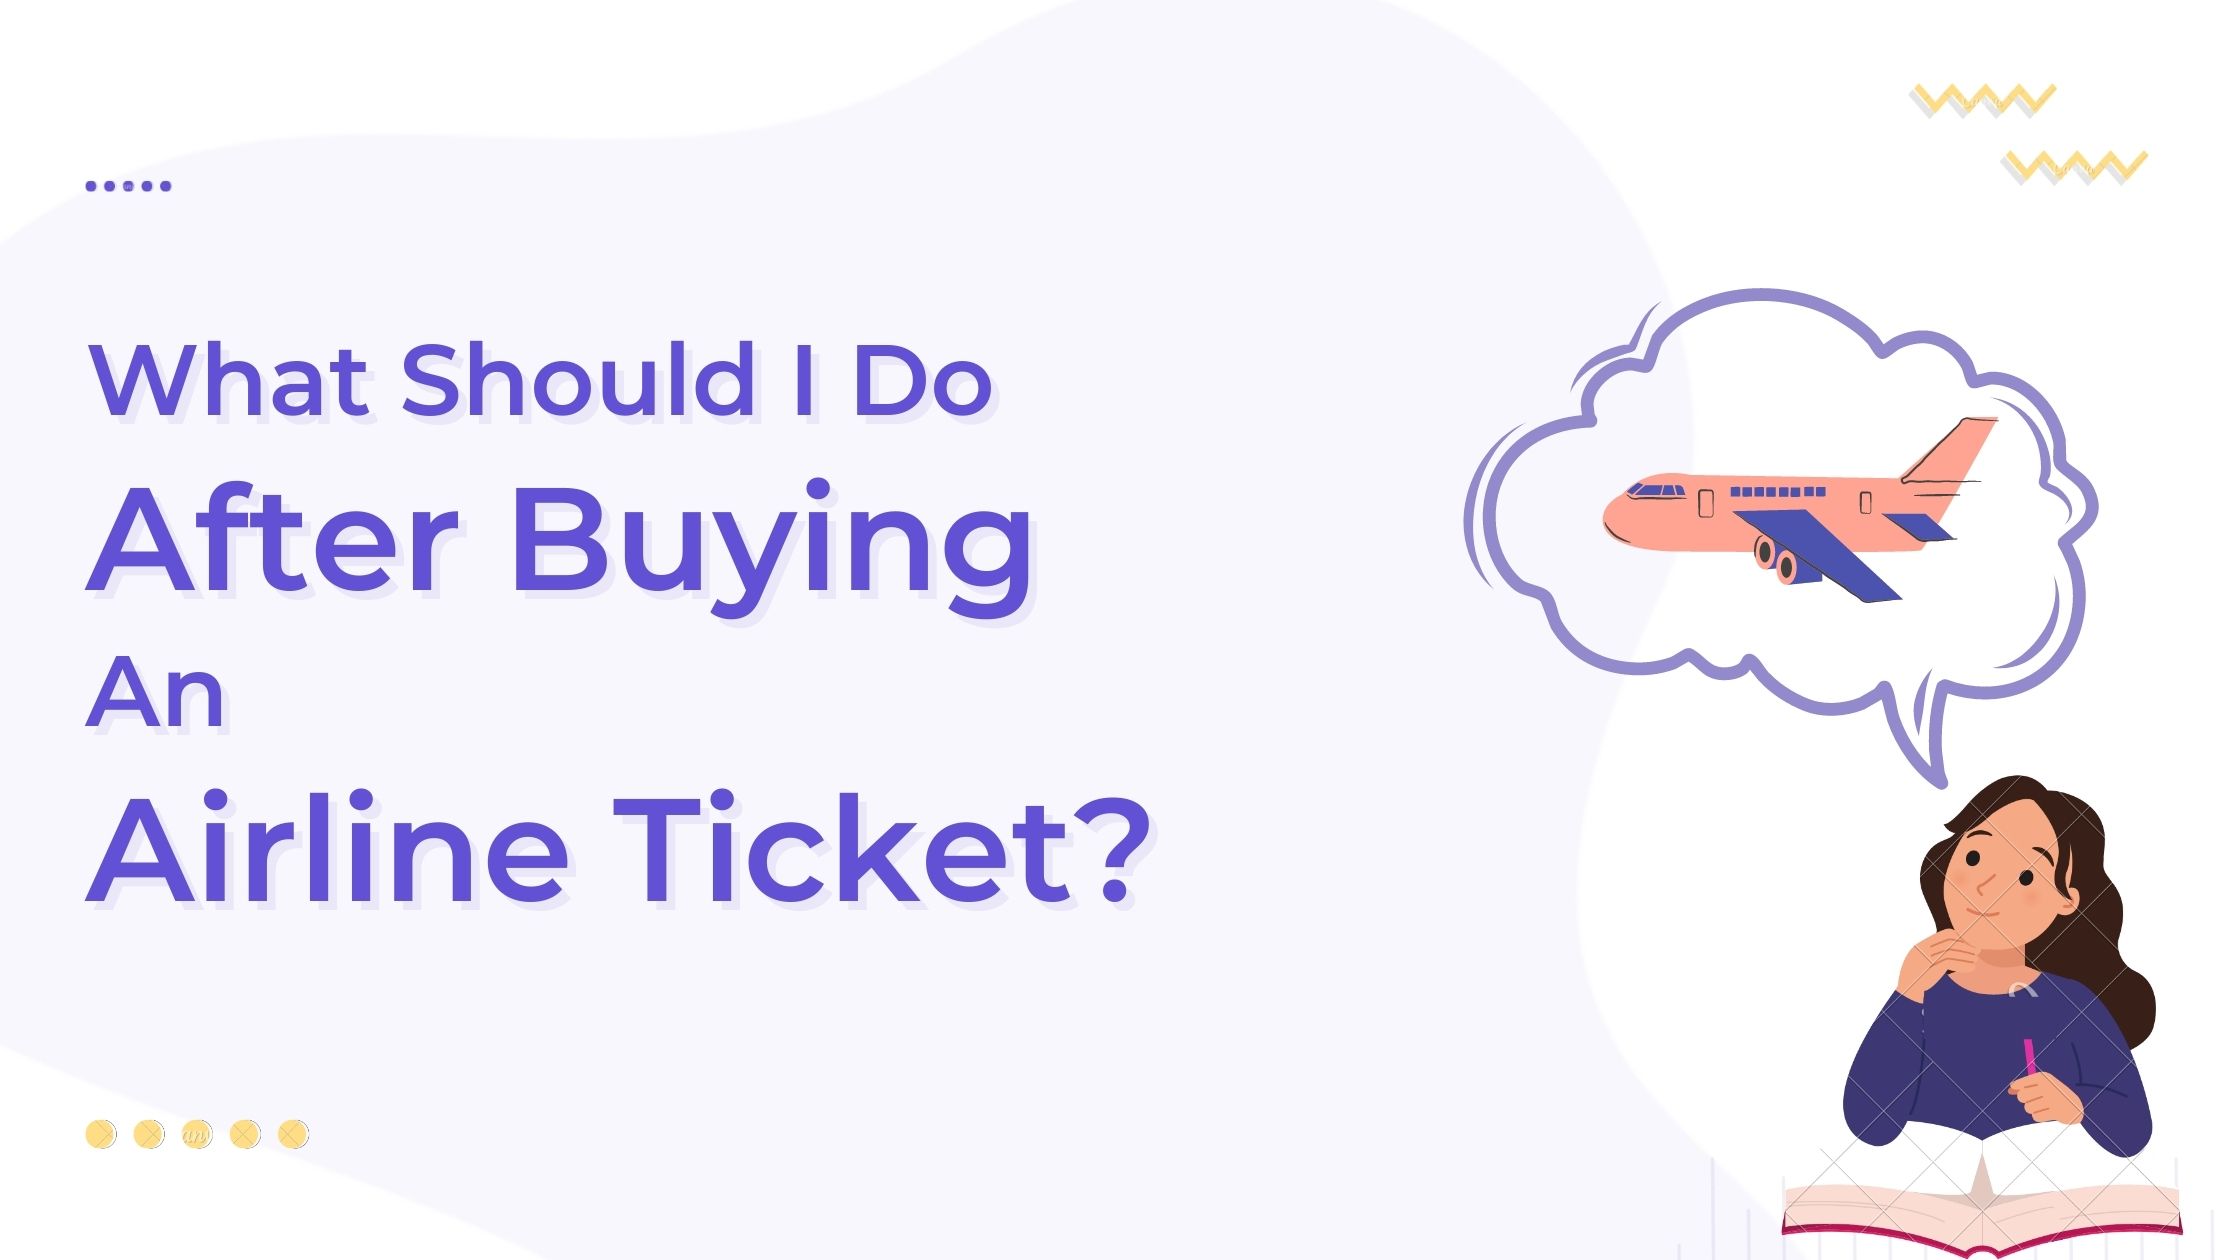 What Should I Do After Buying an Airline Ticket?